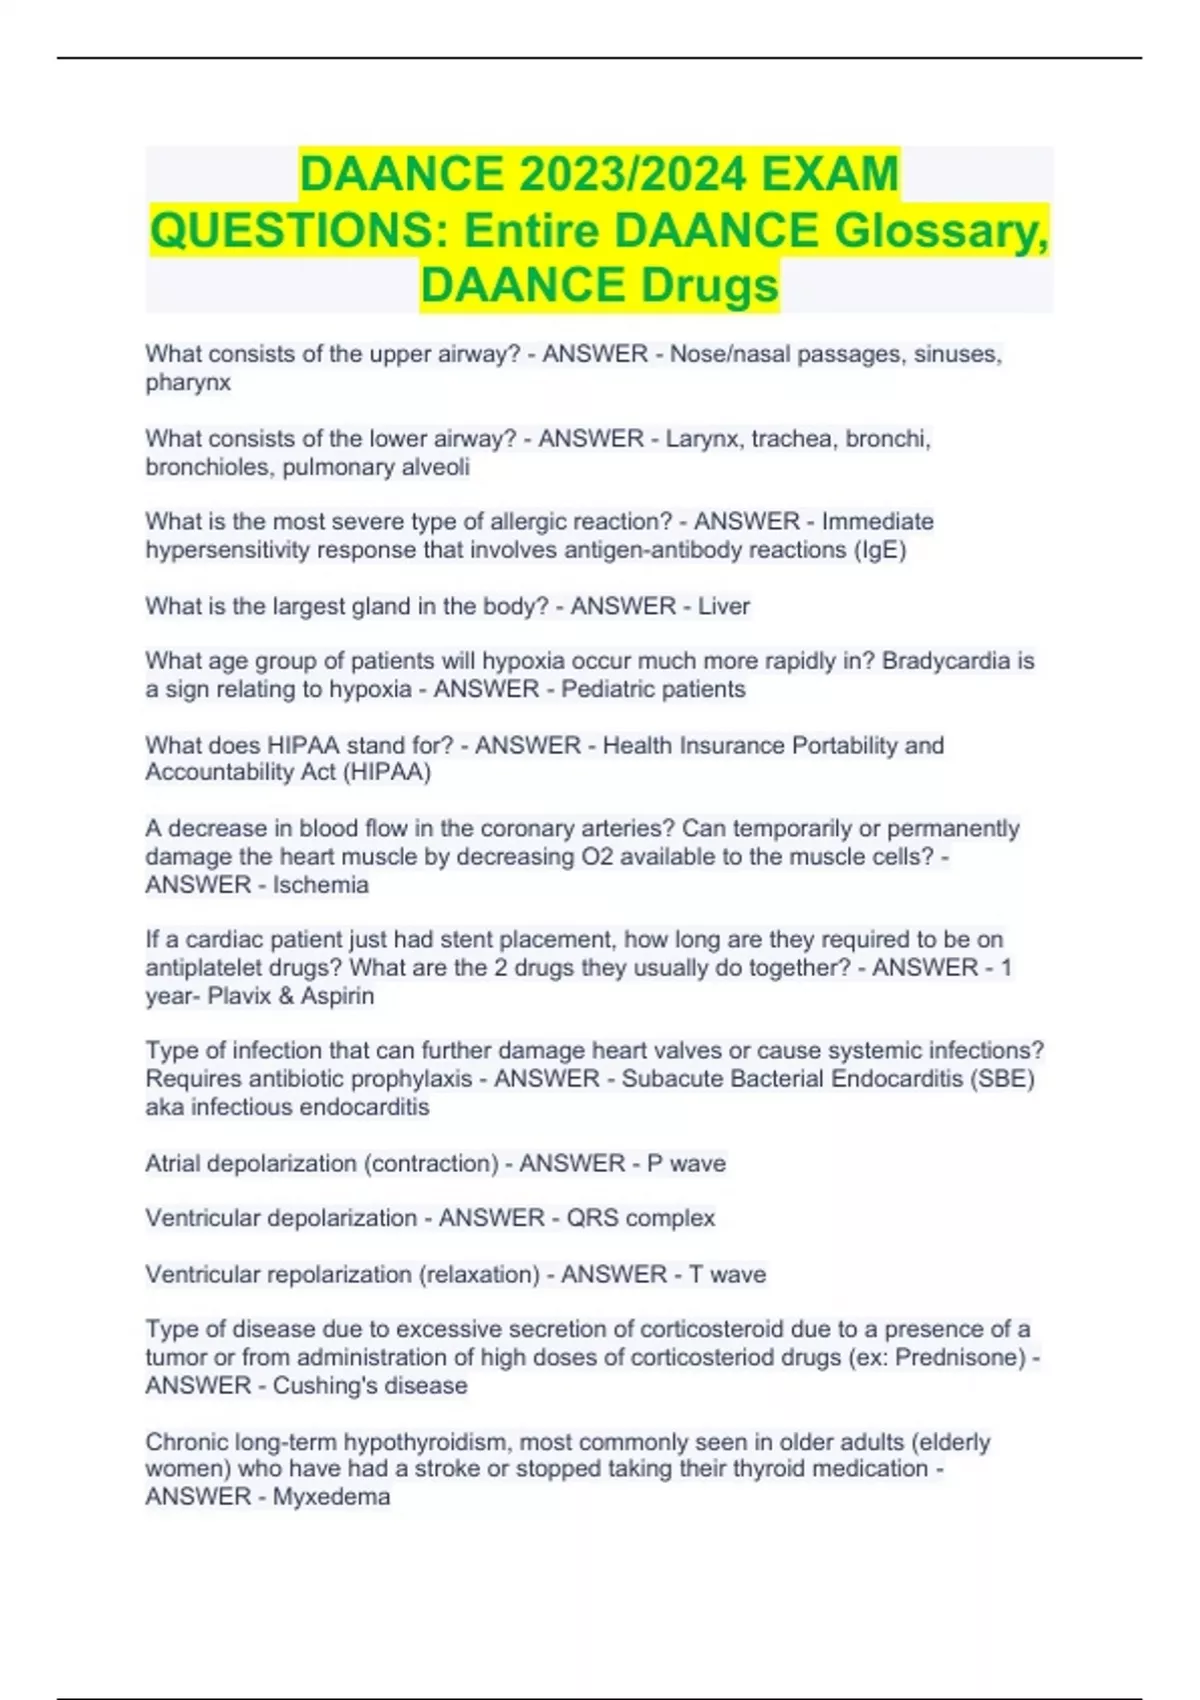 DAANCE 2023/2024 EXAM QUESTIONS Entire DAANCE Glossary, DAANCE Drugs